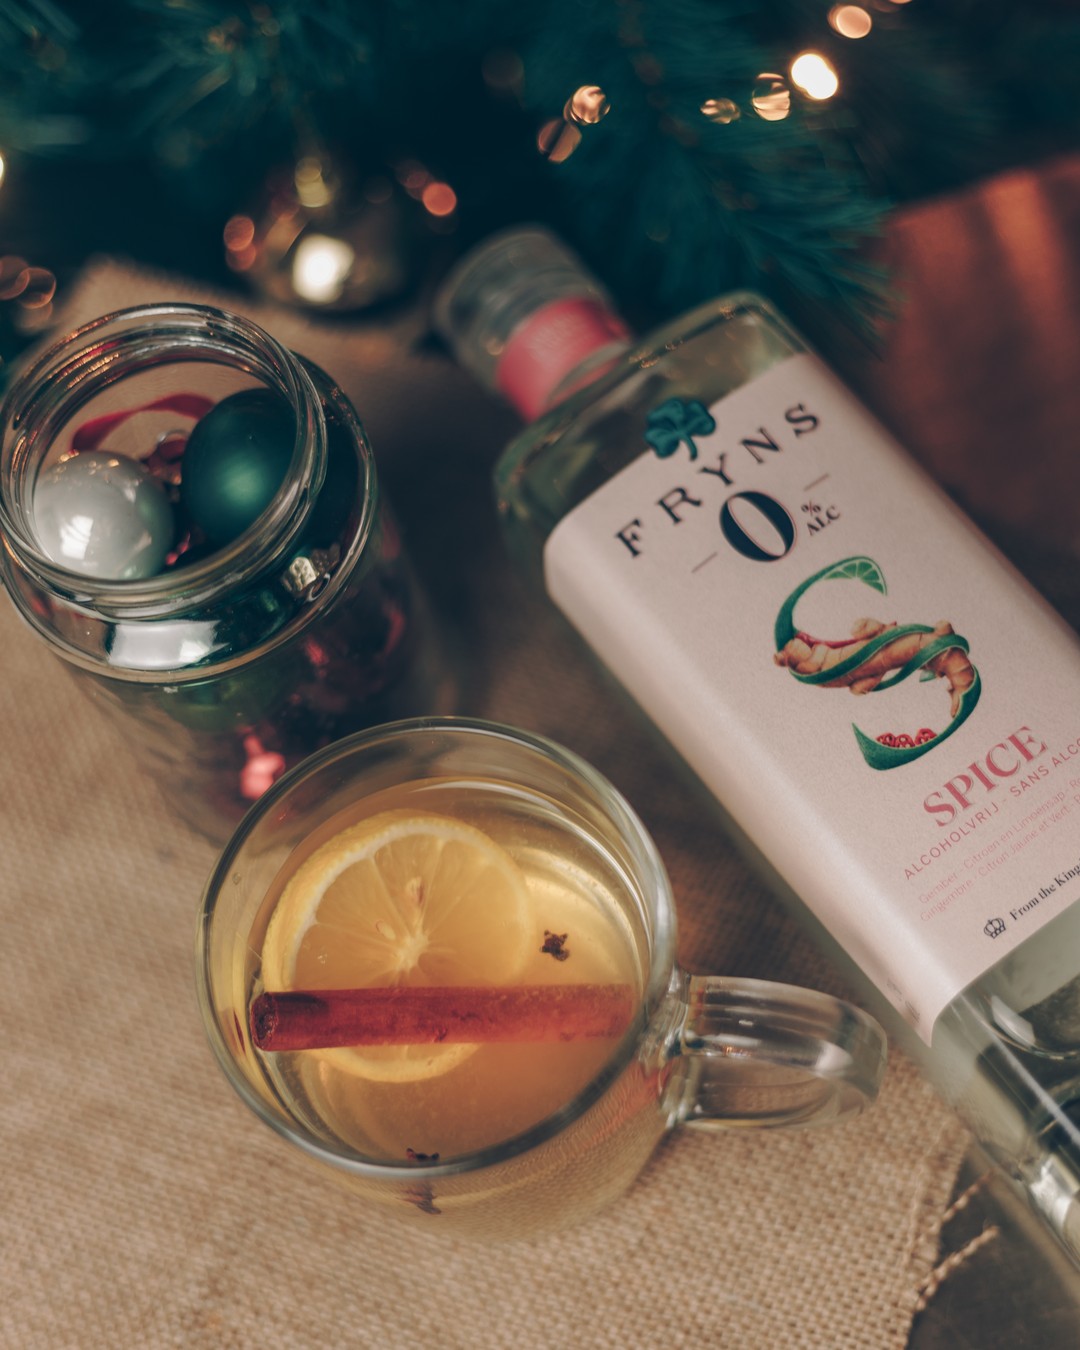 Celebrating the holiday season with a collab with @fryns_distillery (ad).

So proud of this collab! Proud to represent a product which is produced in walking distance from my house. In this cocktail I've used one of their delicious alcohol-free spirits. So happy to share my first ever mocktail on this account! Let's drink mocktails together, haha :D.

Fryns is mainly a distiller or Jenever, so expect some jenever cocktails coming in the couple of next weeks. While I also share some of the reasons why I prefer jenever over gin, and tell a bit of the history of Fryns. Which is currently run by the 4th and 5th generation of Fryns family. 

#mindfulmixologist #cocktailarts #cocktailblog #craftmixology #mixologycocktail #imbibemagazine #favouritecocktail #Cocktailblogger #cocktailsforyou #cocktailacademy #craftedmixology #perfectserve  #mixologist #craftcocktails #cocktails #cocktailporn #imbibe #gintime #bartender  #bartenders #mixology #drinkpic #drinksofinstagram #drinkers #drinkspecial #cocktailsforyou #cocktailsanddreams #cocktaillovers #cocktailculture #mixologyart